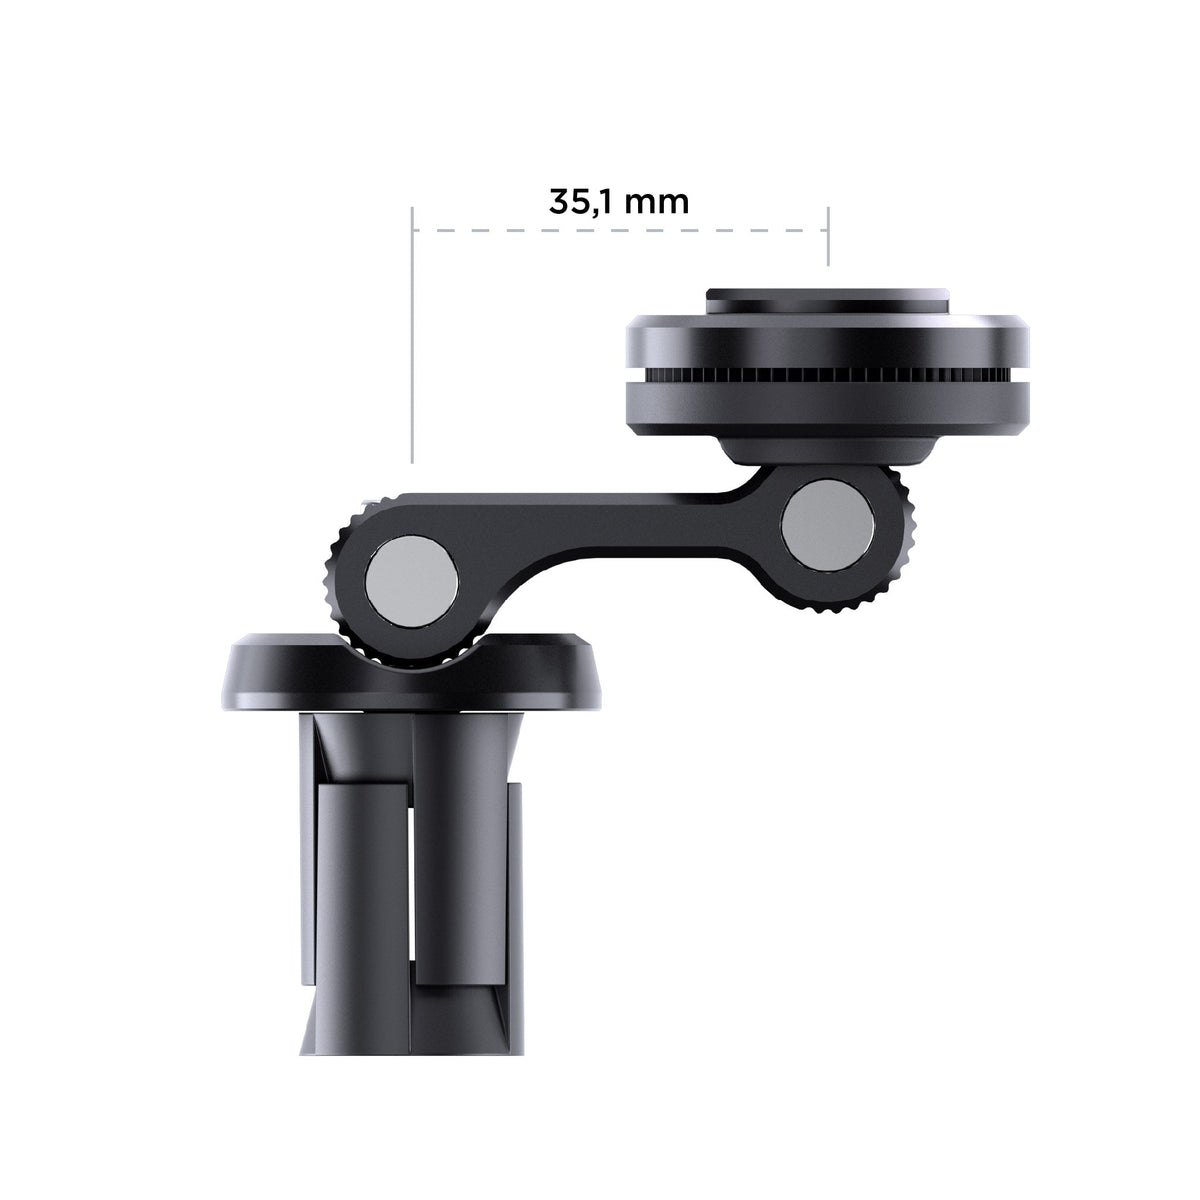 SP CONNECT Moto Stem Mount - Universal attachments for motorcycles